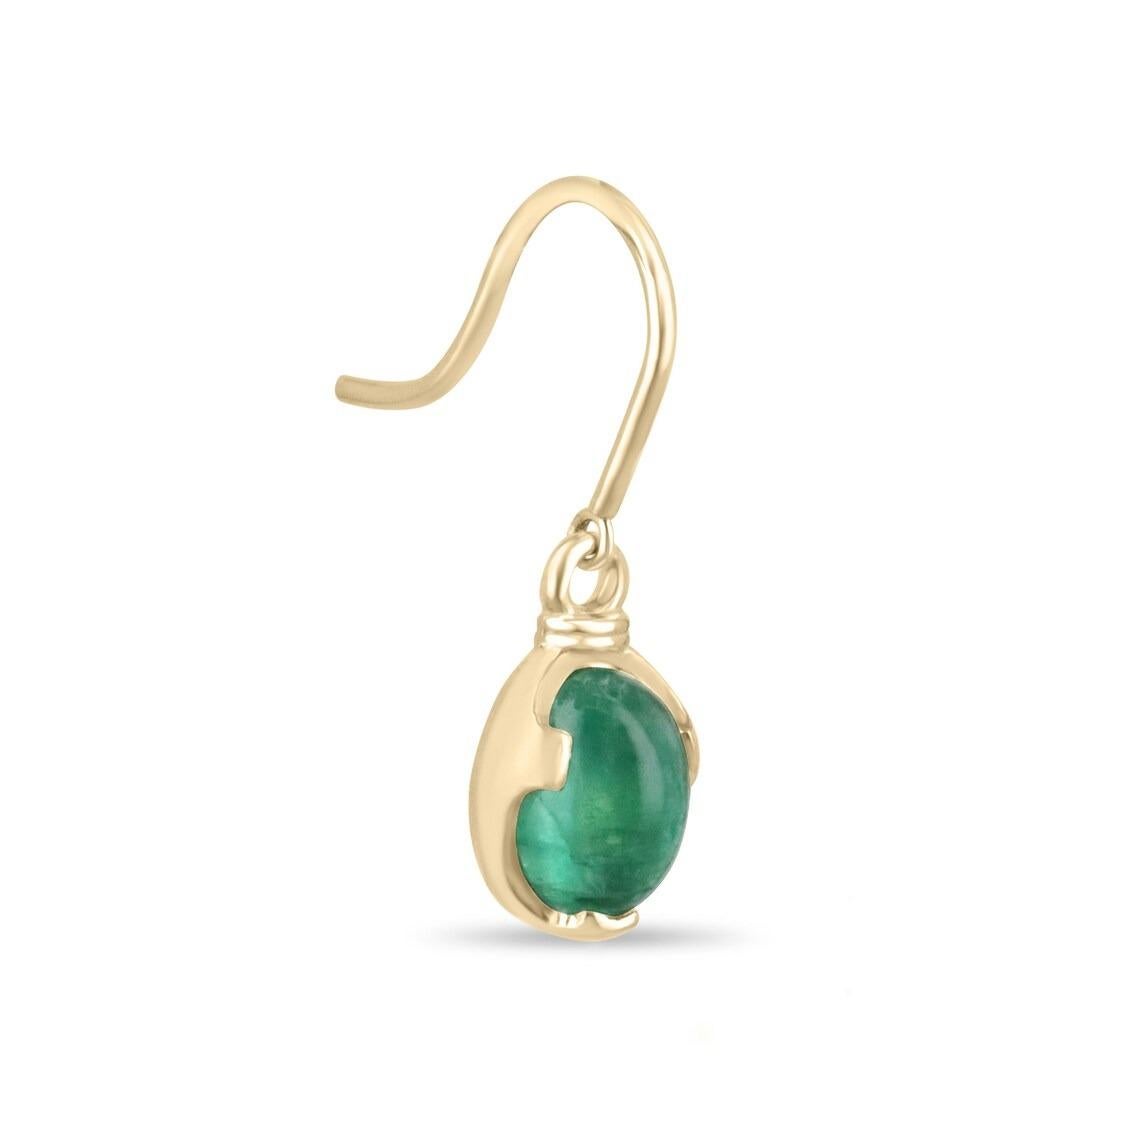 These emerald dangle earrings feature two stunning cabochon cut oval-shaped emeralds, each exhibiting a rich green color and beautiful characteristics. With a combined weight of 3.60 carats, these emeralds captivate the eye with their exceptional